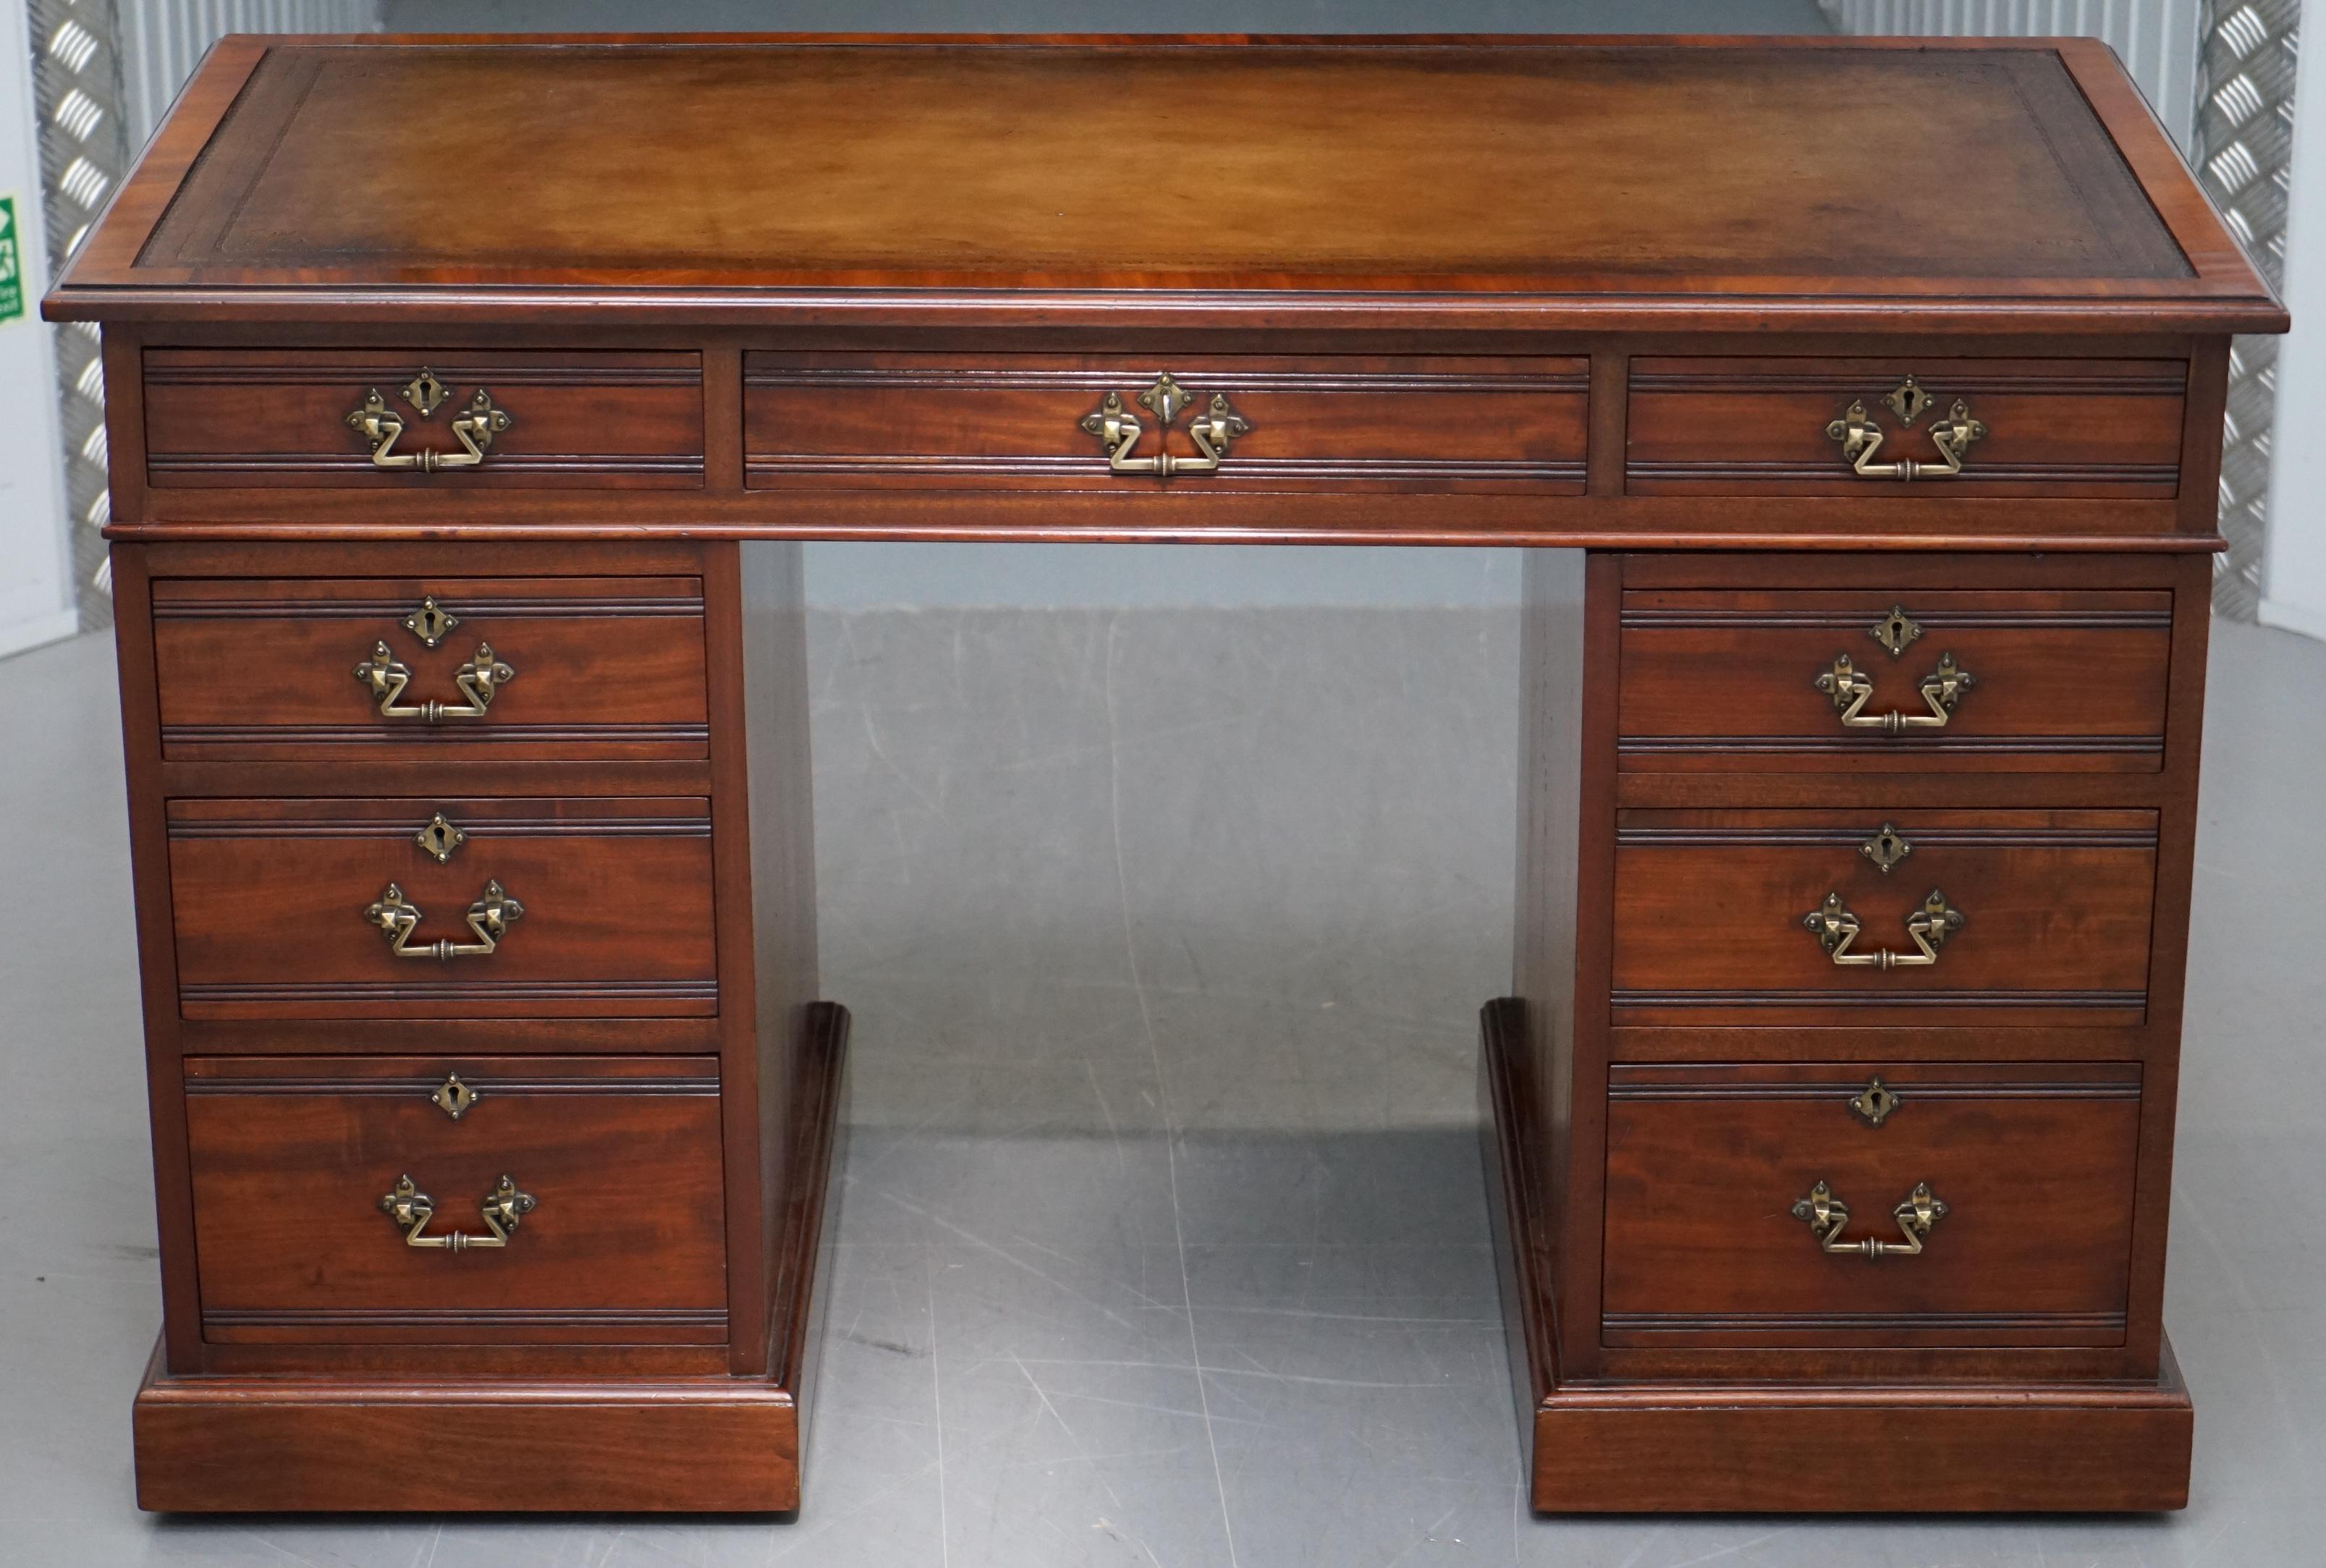 We are delighted to offer for sale this lovely handmade in England by Howard & Son’s of Berners Street London twin pedestal partner desk with hand dyed brown leather top

A very good looking and well made desk, it has the original Howard serial